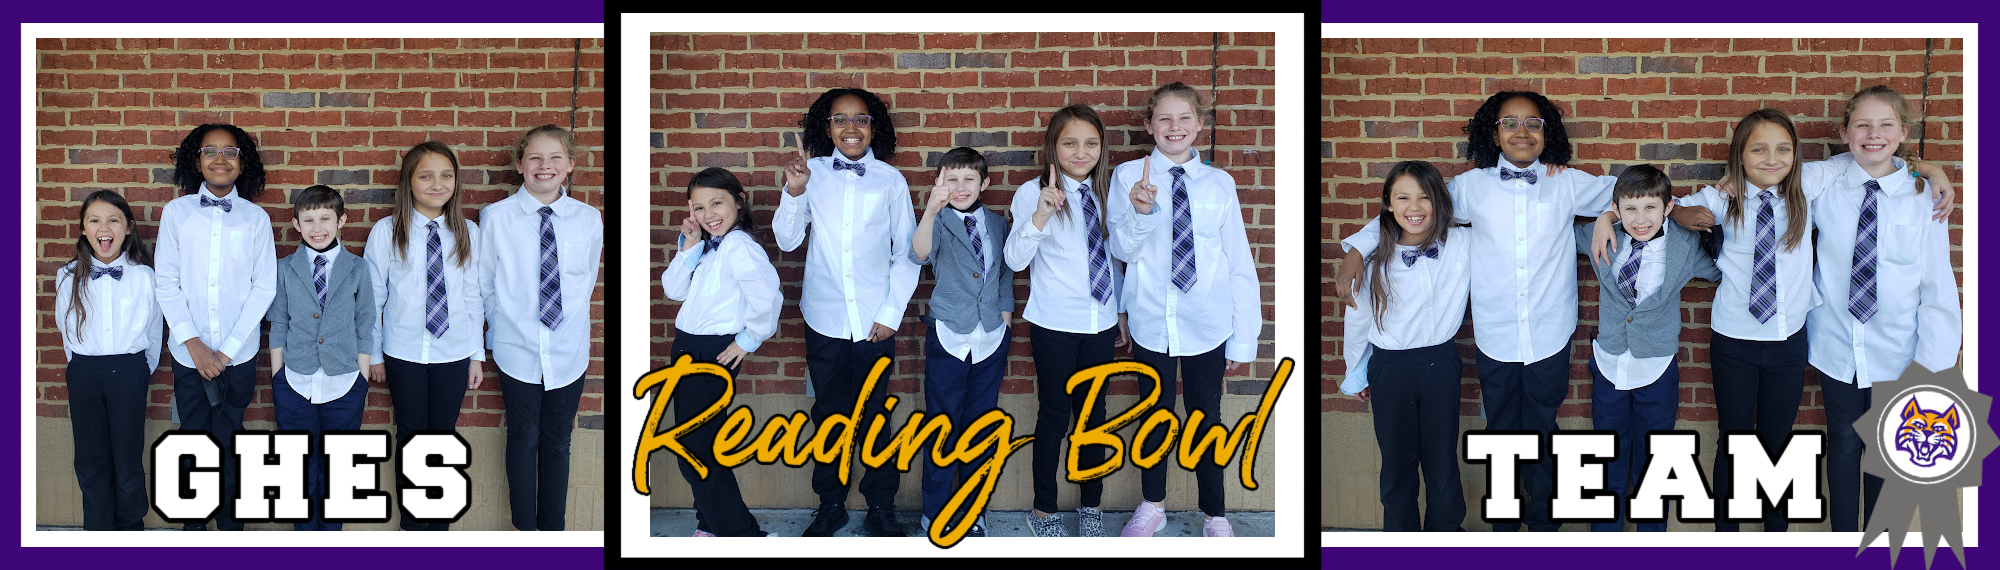 student reading bowl team standing together